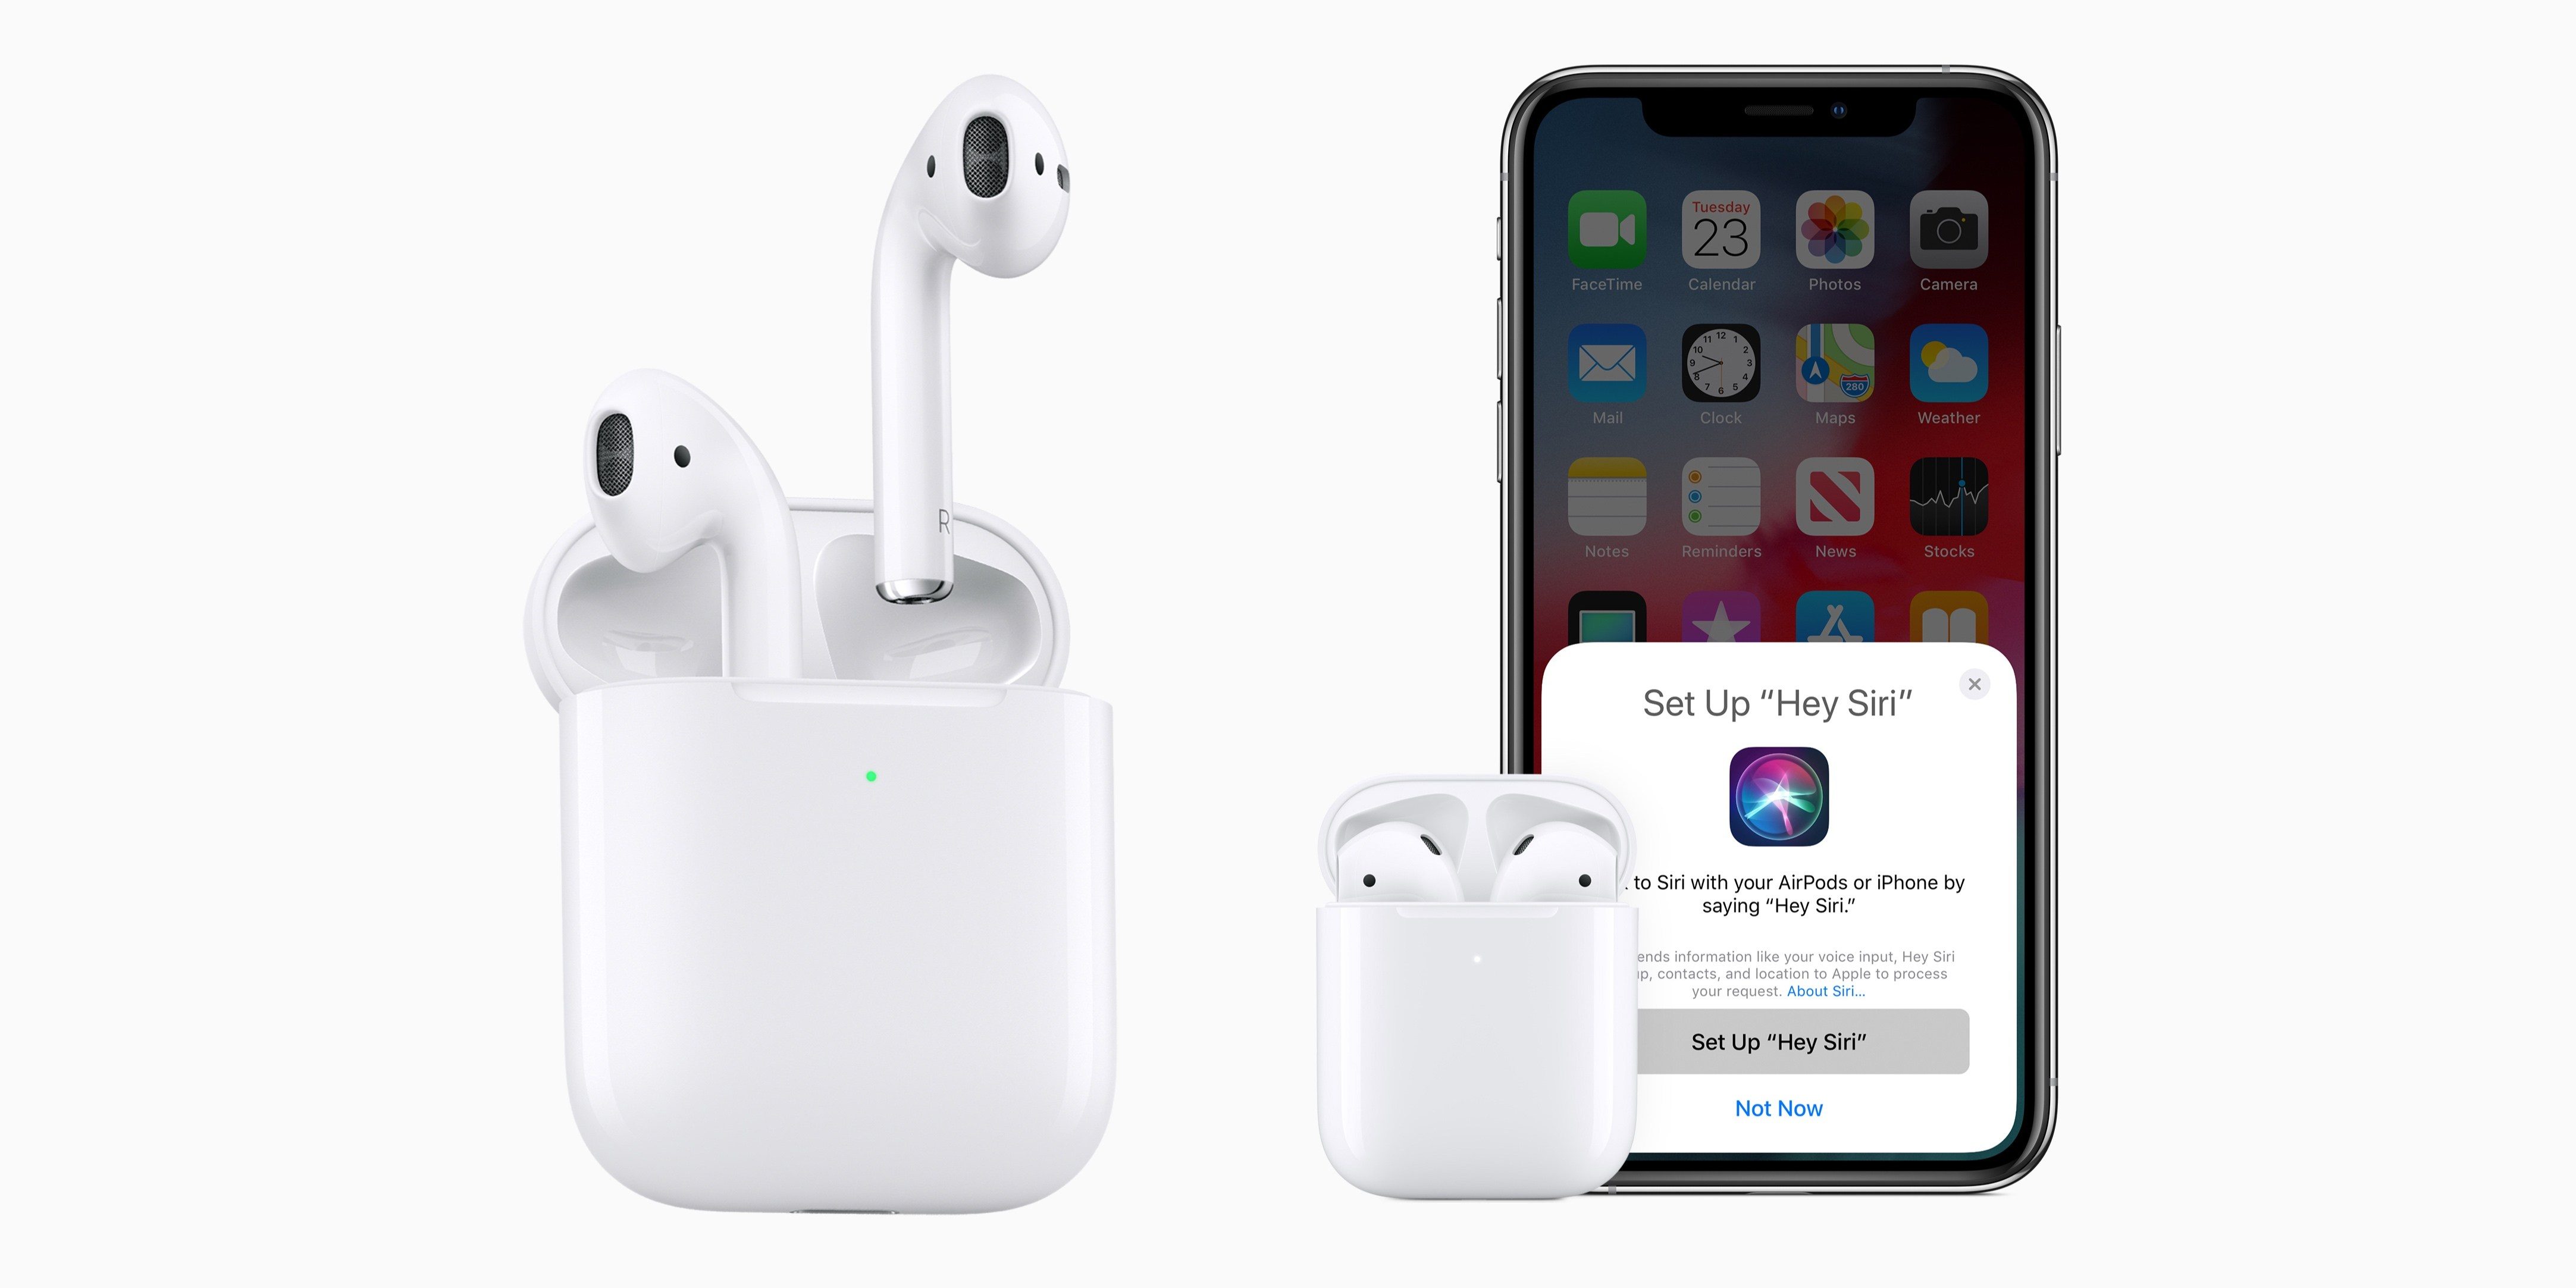 AirPods and AirPods Pro: News, Features, Reviews, Pricing, etc